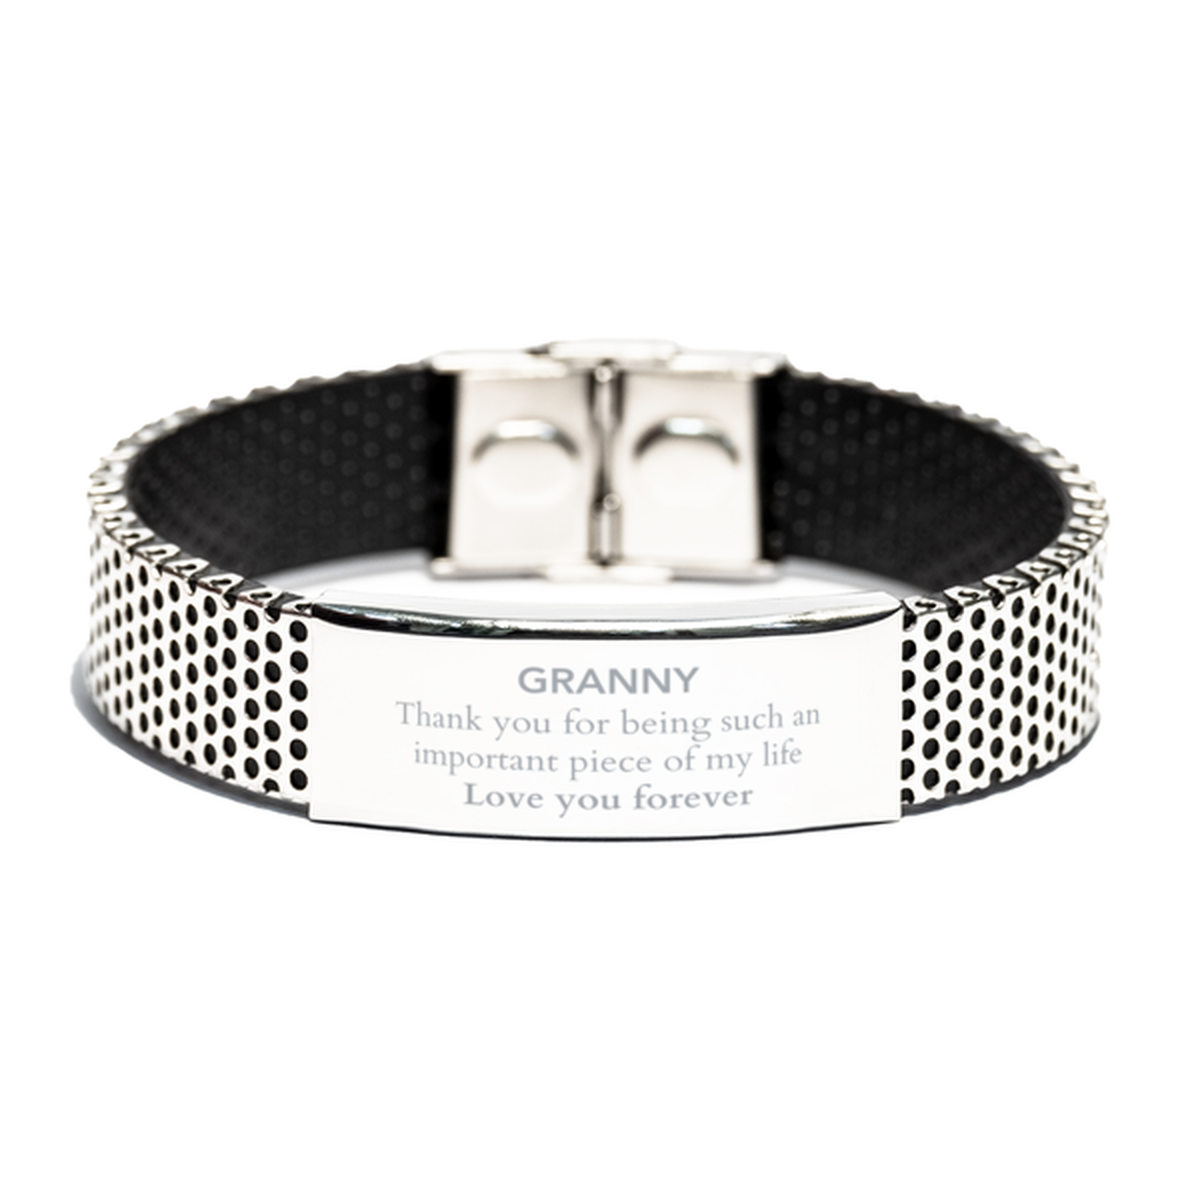 Appropriate Granny Stainless Steel Bracelet Epic Birthday Gifts for Granny Thank you for being such an important piece of my life Granny Christmas Mothers Fathers Day